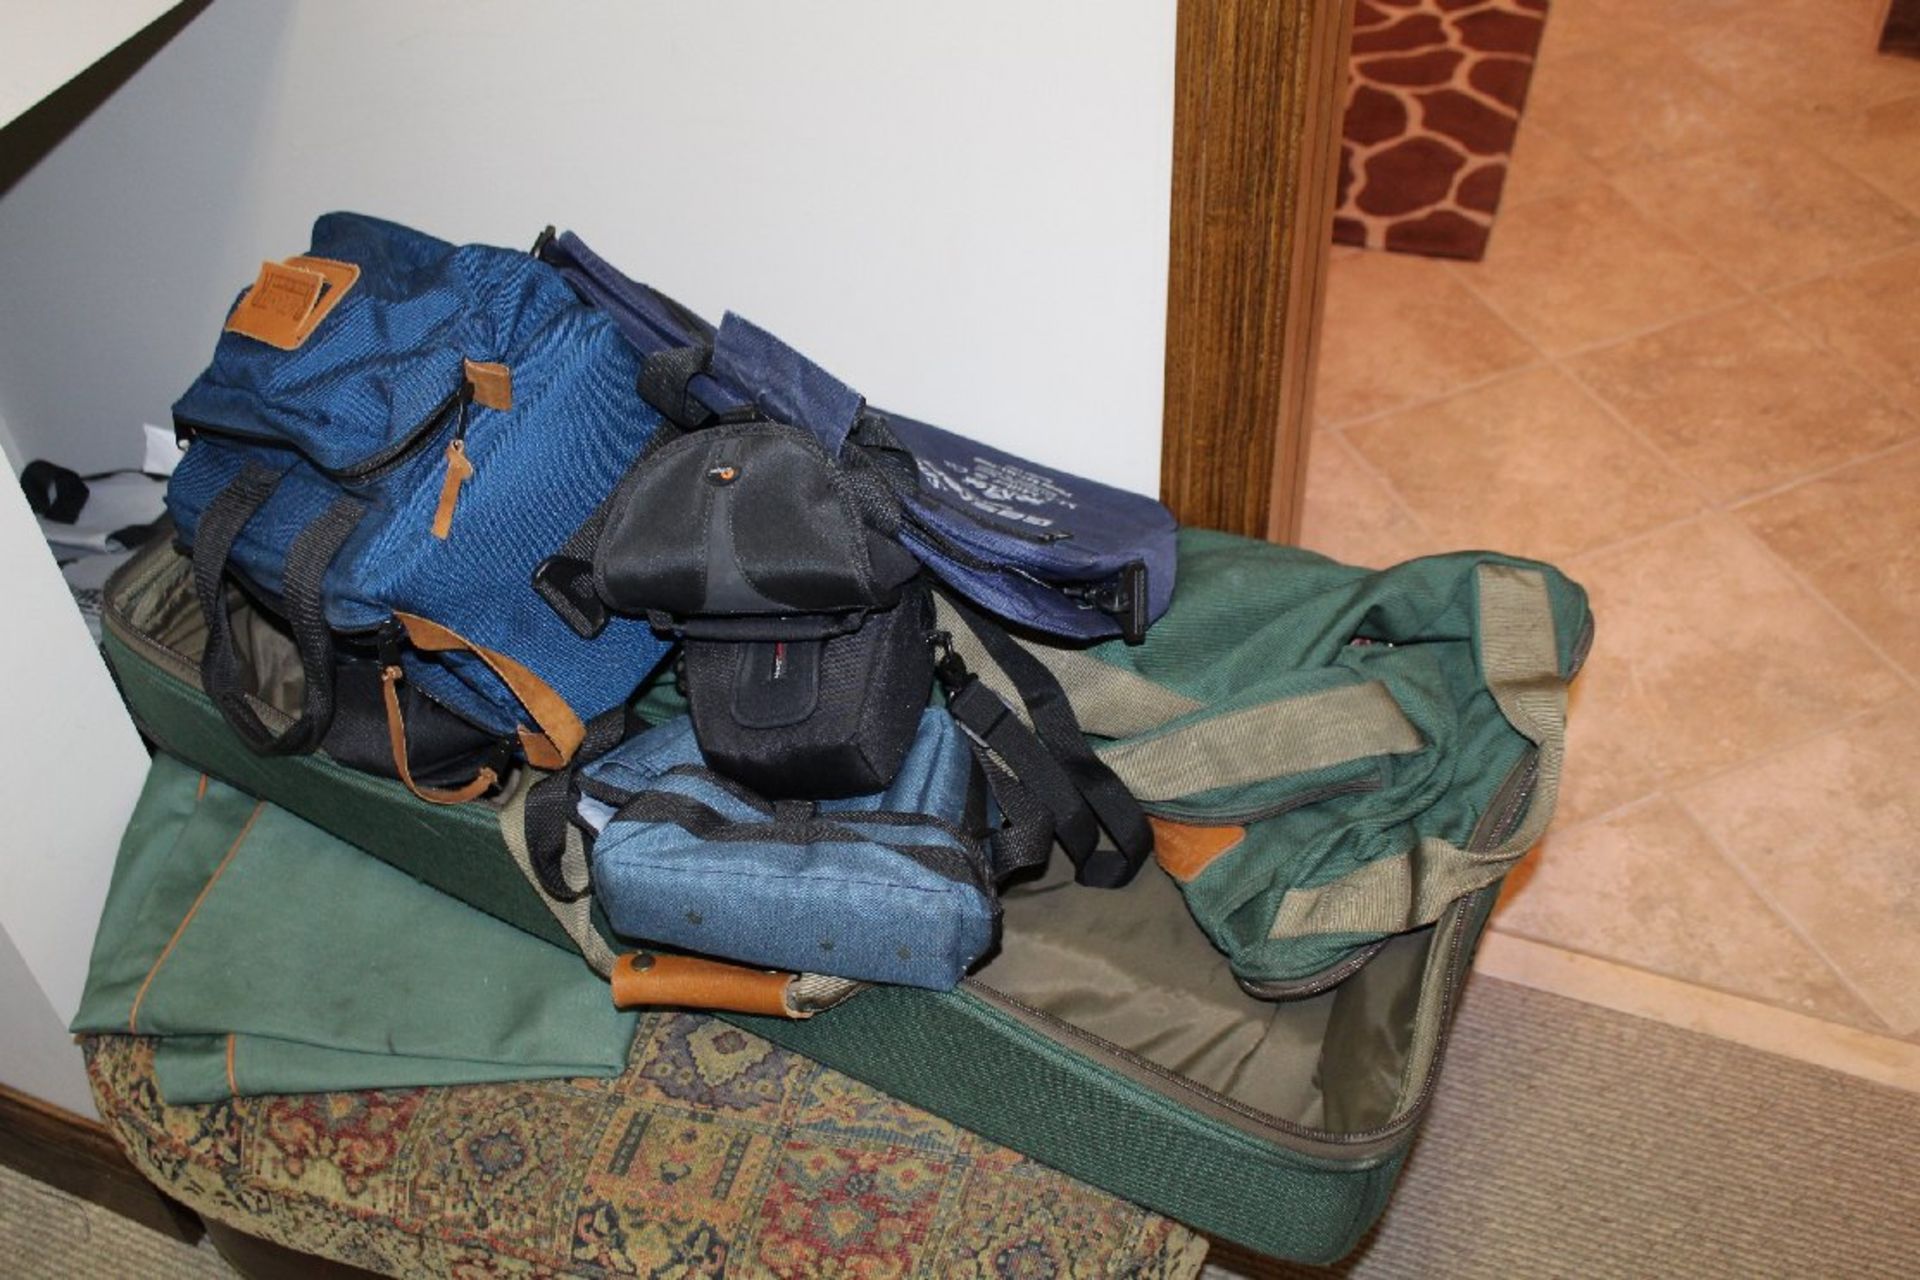 Contents of Closet, Assorted Hunting/Outdoor Clothing, Luggage, Office Supplies, Prints, Boots, - Image 3 of 10